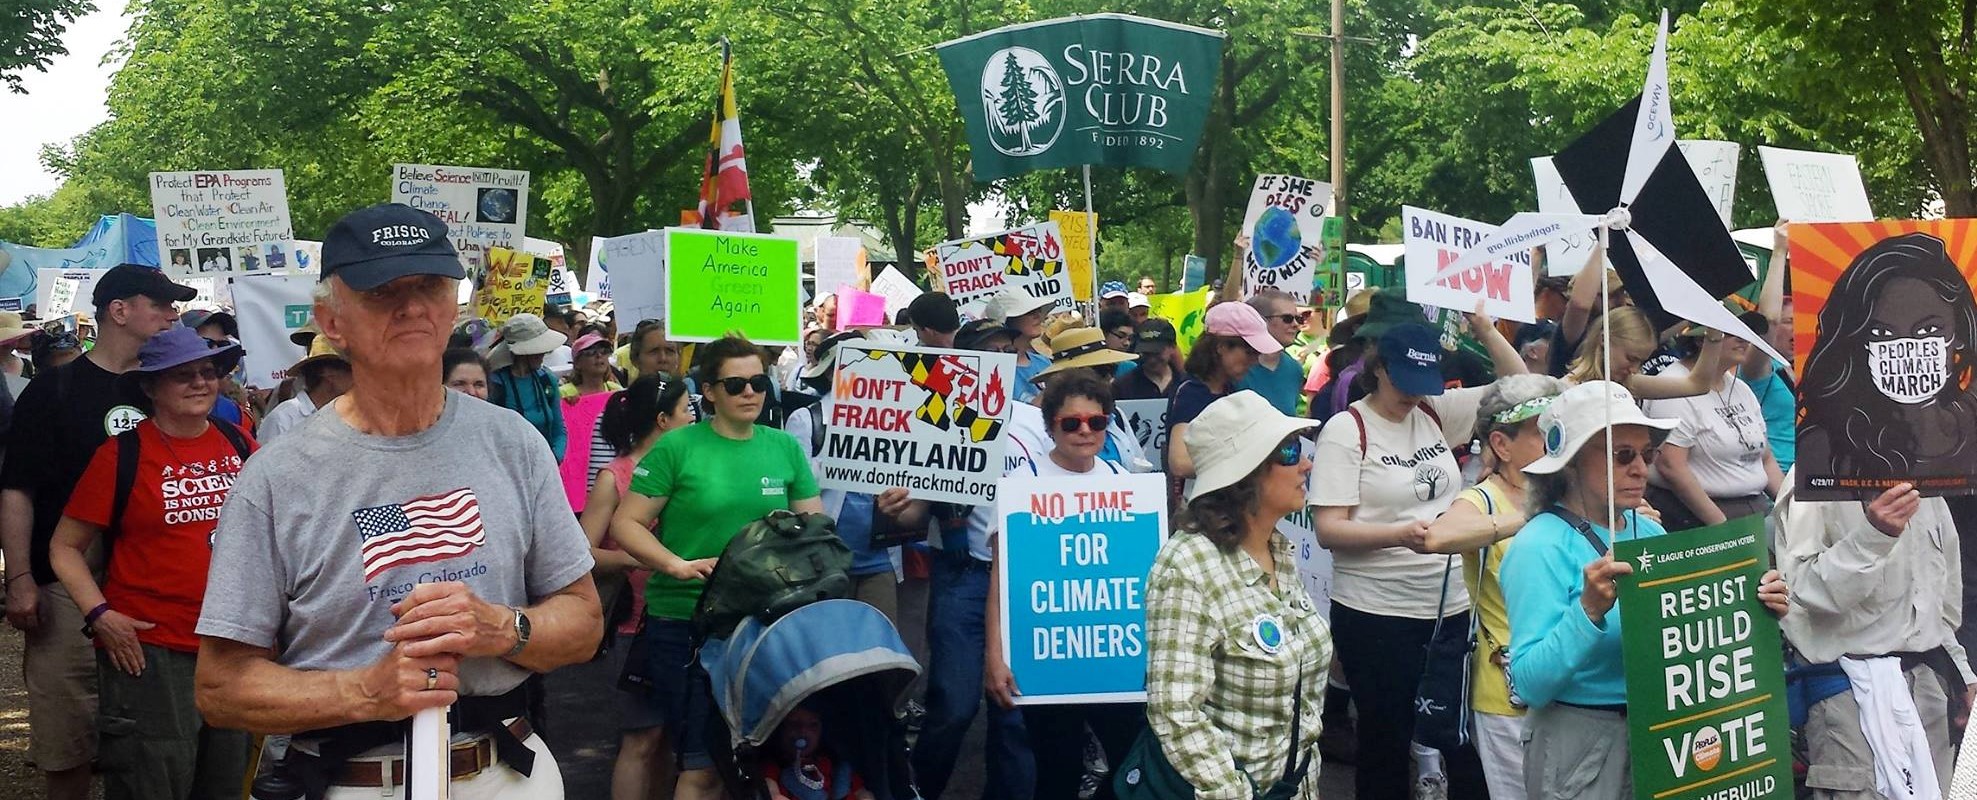 Montgomery County Sierra Club gathered at 2017 Climate Change Rally